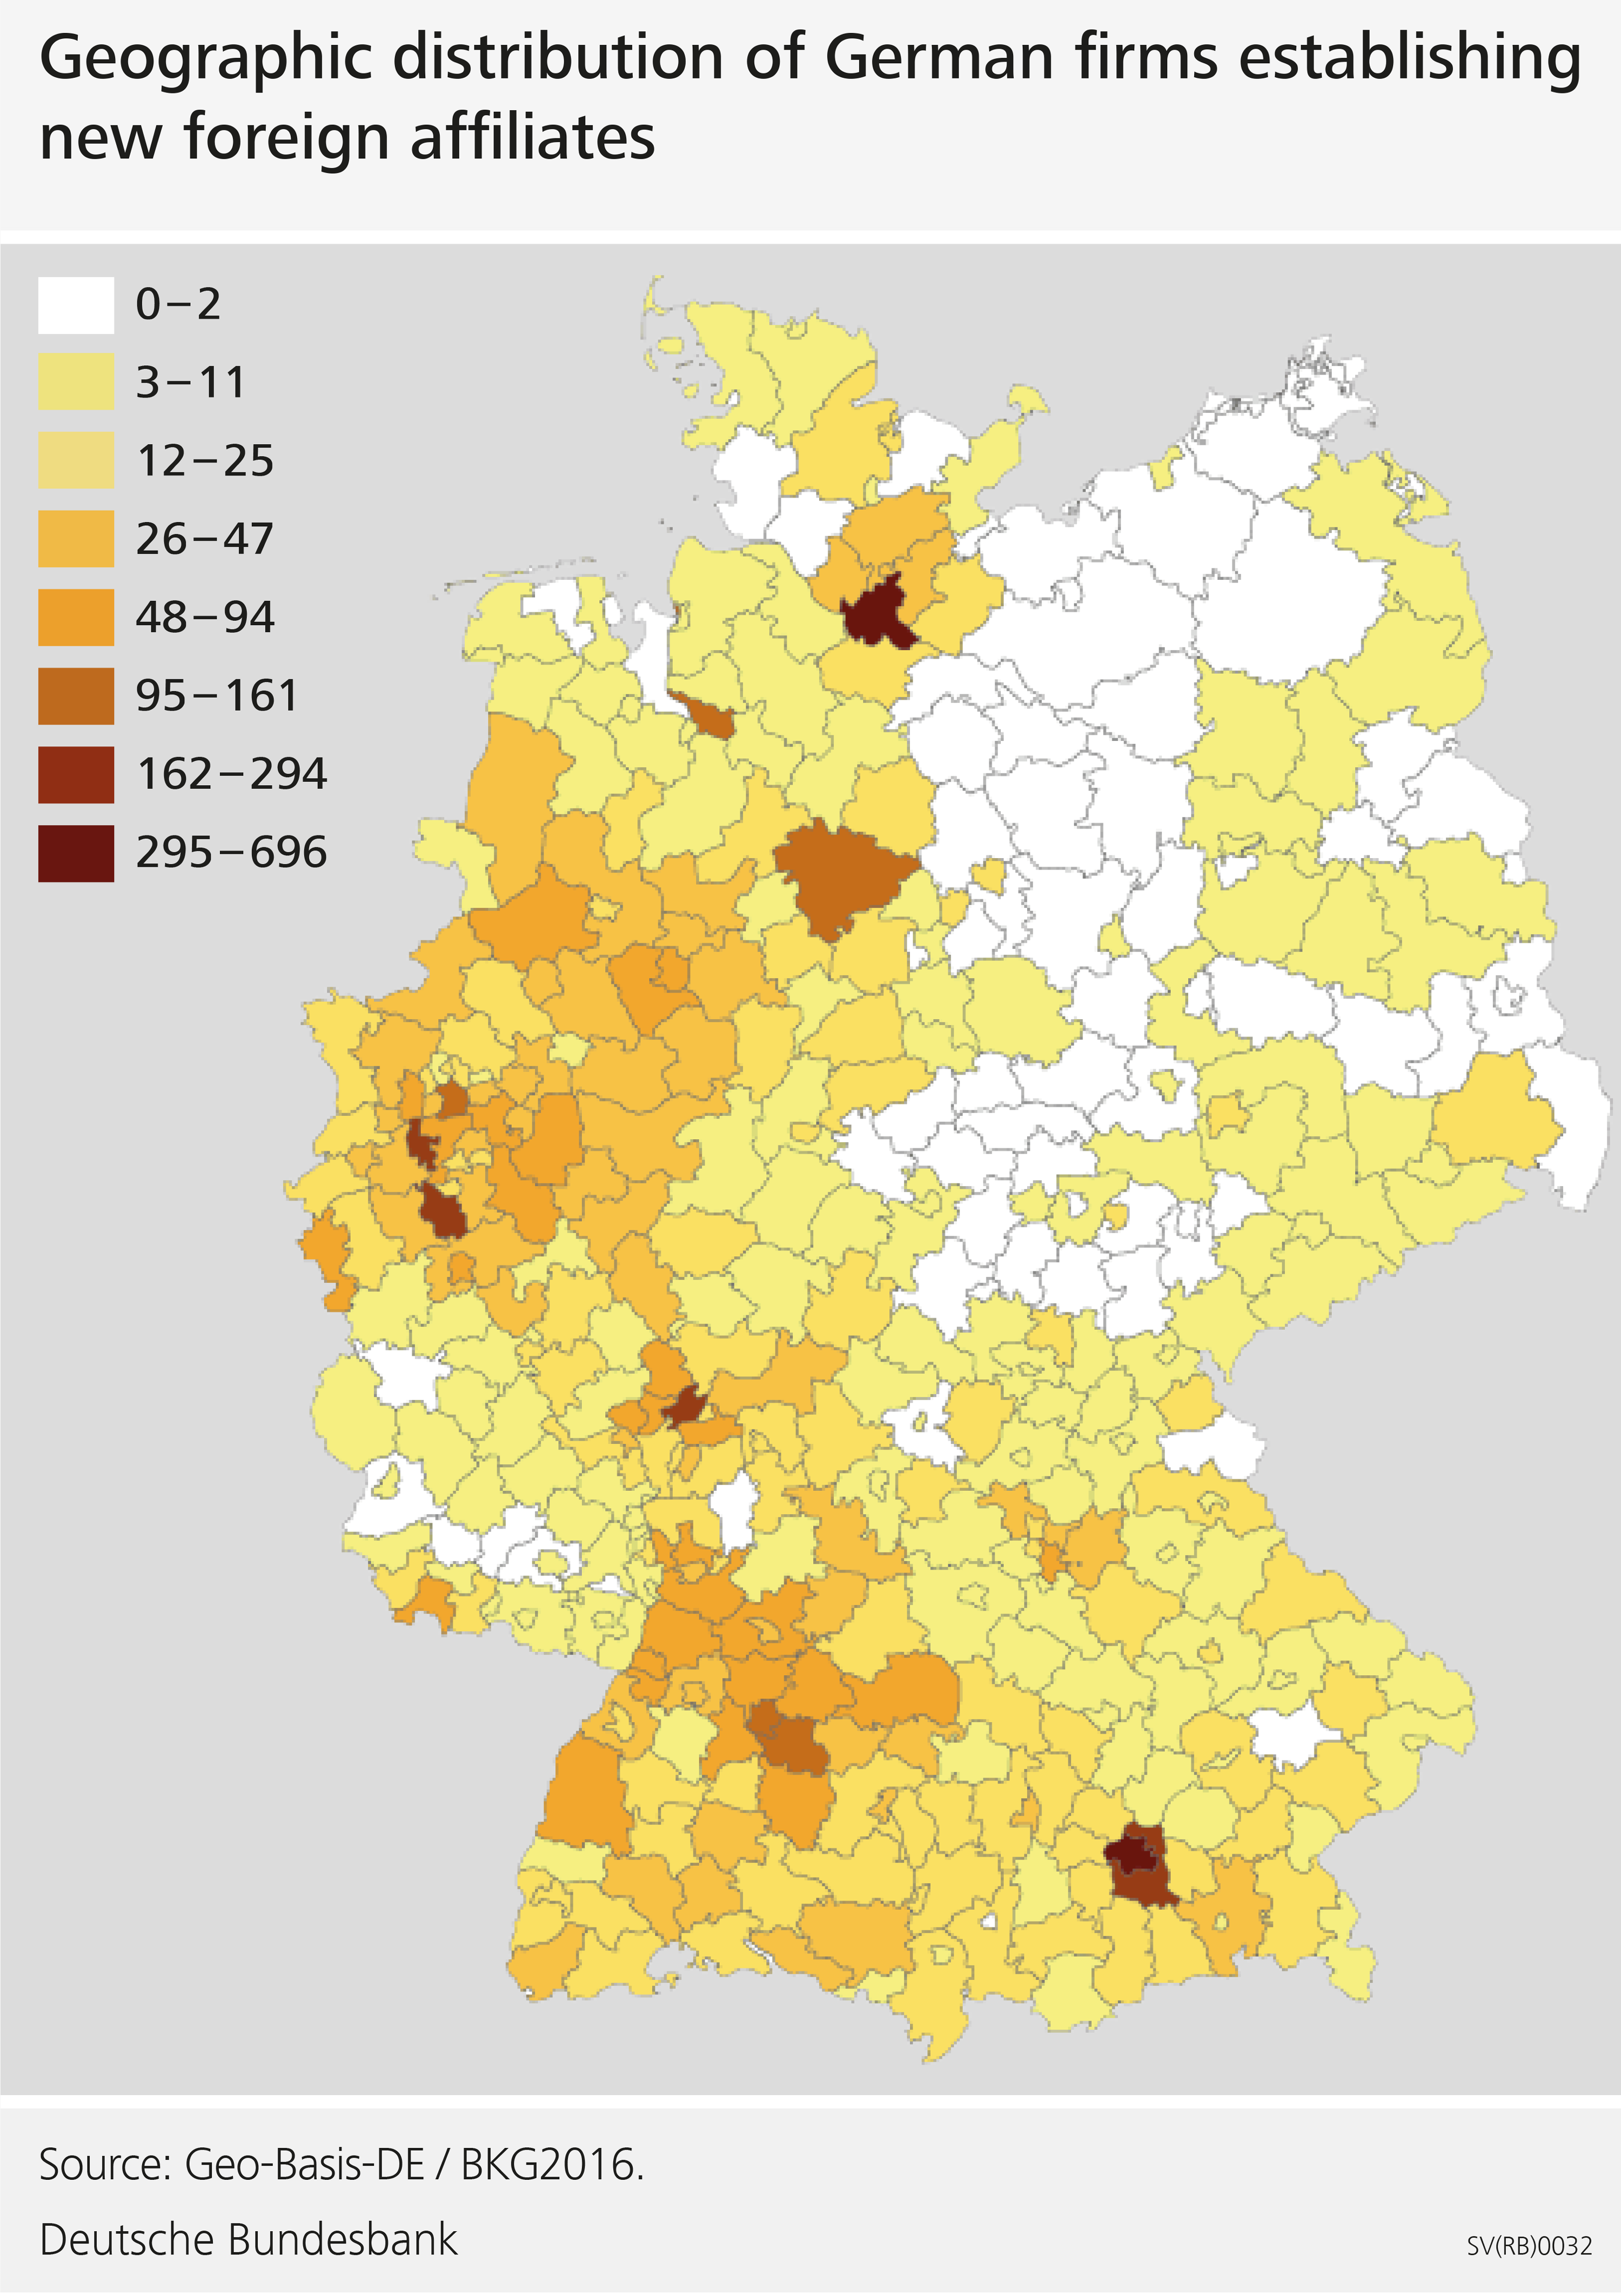 Figure 1: Geographic distribution of German firms establishing new foreign affiliates